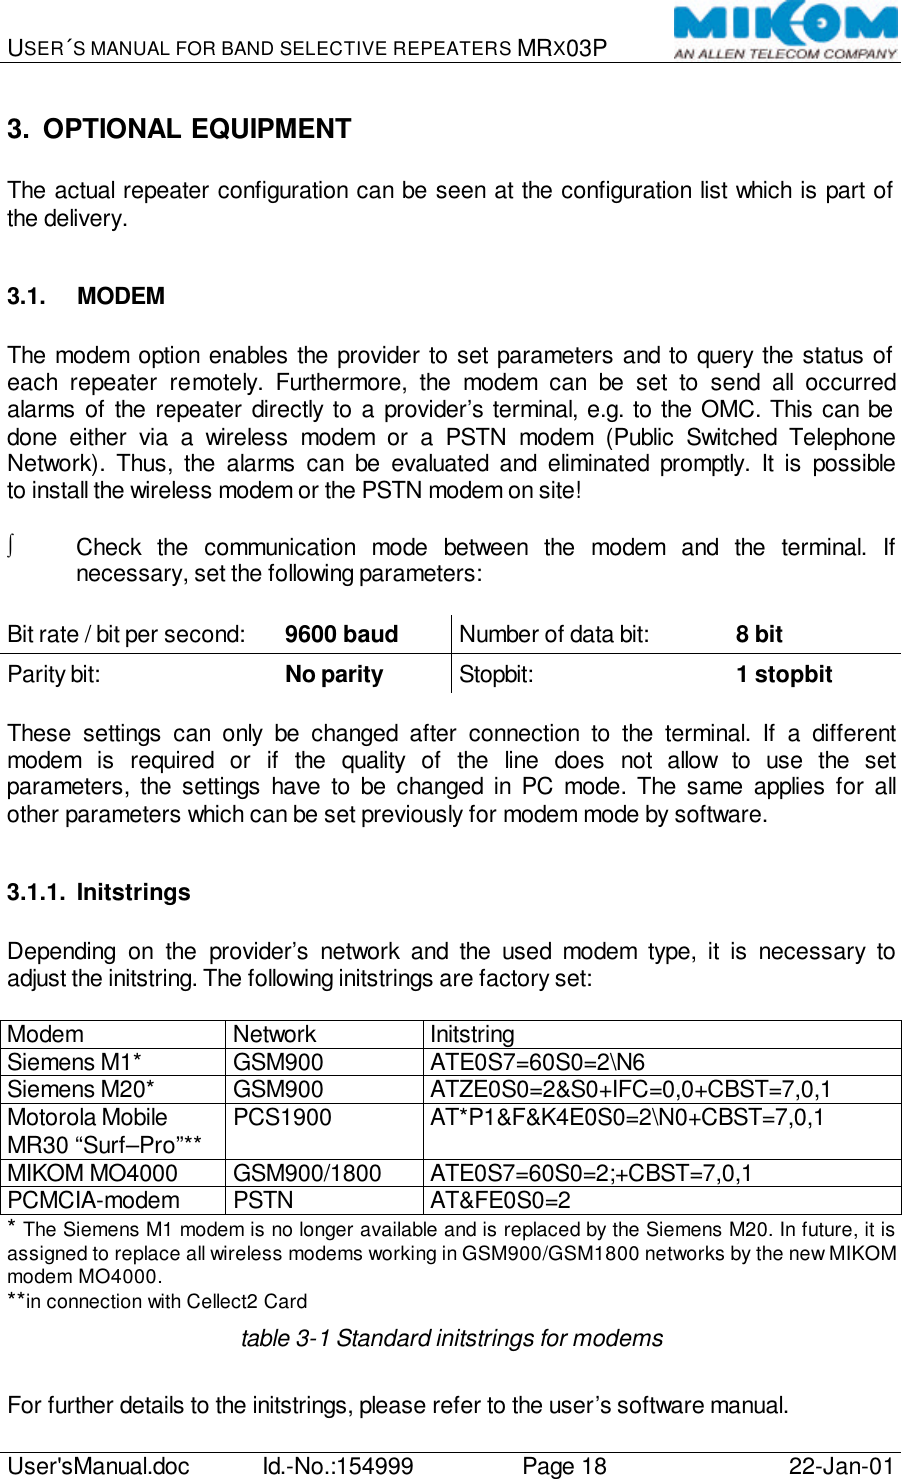 USER´S MANUAL FOR BAND SELECTIVE REPEATERS MRX03P   User&apos;sManual.doc Id.-No.:154999 Page 18 22-Jan-01  3. OPTIONAL EQUIPMENT  The actual repeater configuration can be seen at the configuration list which is part of the delivery.  3.1. MODEM  The modem option enables the provider to set parameters and to query the status of each repeater remotely. Furthermore, the modem can be set to send all occurred alarms of the repeater directly to a provider’s terminal, e.g. to the OMC. This can be done either via a wireless modem or a PSTN modem (Public Switched Telephone Network). Thus, the alarms can be evaluated and eliminated promptly. It is possible to install the wireless modem or the PSTN modem on site!  ∫ Check the communication mode between the modem and the terminal. If necessary, set the following parameters:  Bit rate / bit per second: 9600 baud Number of data bit:    8 bit Parity bit:      No parity Stopbit:   1 stopbit  These settings can only be changed after connection to the terminal. If a different modem is required or if the quality of the line does not allow to use the set parameters, the settings have to be changed in PC mode. The same applies for all other parameters which can be set previously for modem mode by software.  3.1.1. Initstrings  Depending on the provider’s network and the used modem type, it is necessary to adjust the initstring. The following initstrings are factory set:  Modem Network Initstring Siemens M1* GSM900 ATE0S7=60S0=2\N6 Siemens M20* GSM900 ATZE0S0=2&amp;S0+IFC=0,0+CBST=7,0,1 Motorola Mobile MR30 “Surf–Pro”** PCS1900 AT*P1&amp;F&amp;K4E0S0=2\N0+CBST=7,0,1 MIKOM MO4000 GSM900/1800 ATE0S7=60S0=2;+CBST=7,0,1 PCMCIA-modem PSTN AT&amp;FE0S0=2 * The Siemens M1 modem is no longer available and is replaced by the Siemens M20. In future, it is assigned to replace all wireless modems working in GSM900/GSM1800 networks by the new MIKOM modem MO4000. **in connection with Cellect2 Card table 3-1 Standard initstrings for modems  For further details to the initstrings, please refer to the user’s software manual. 